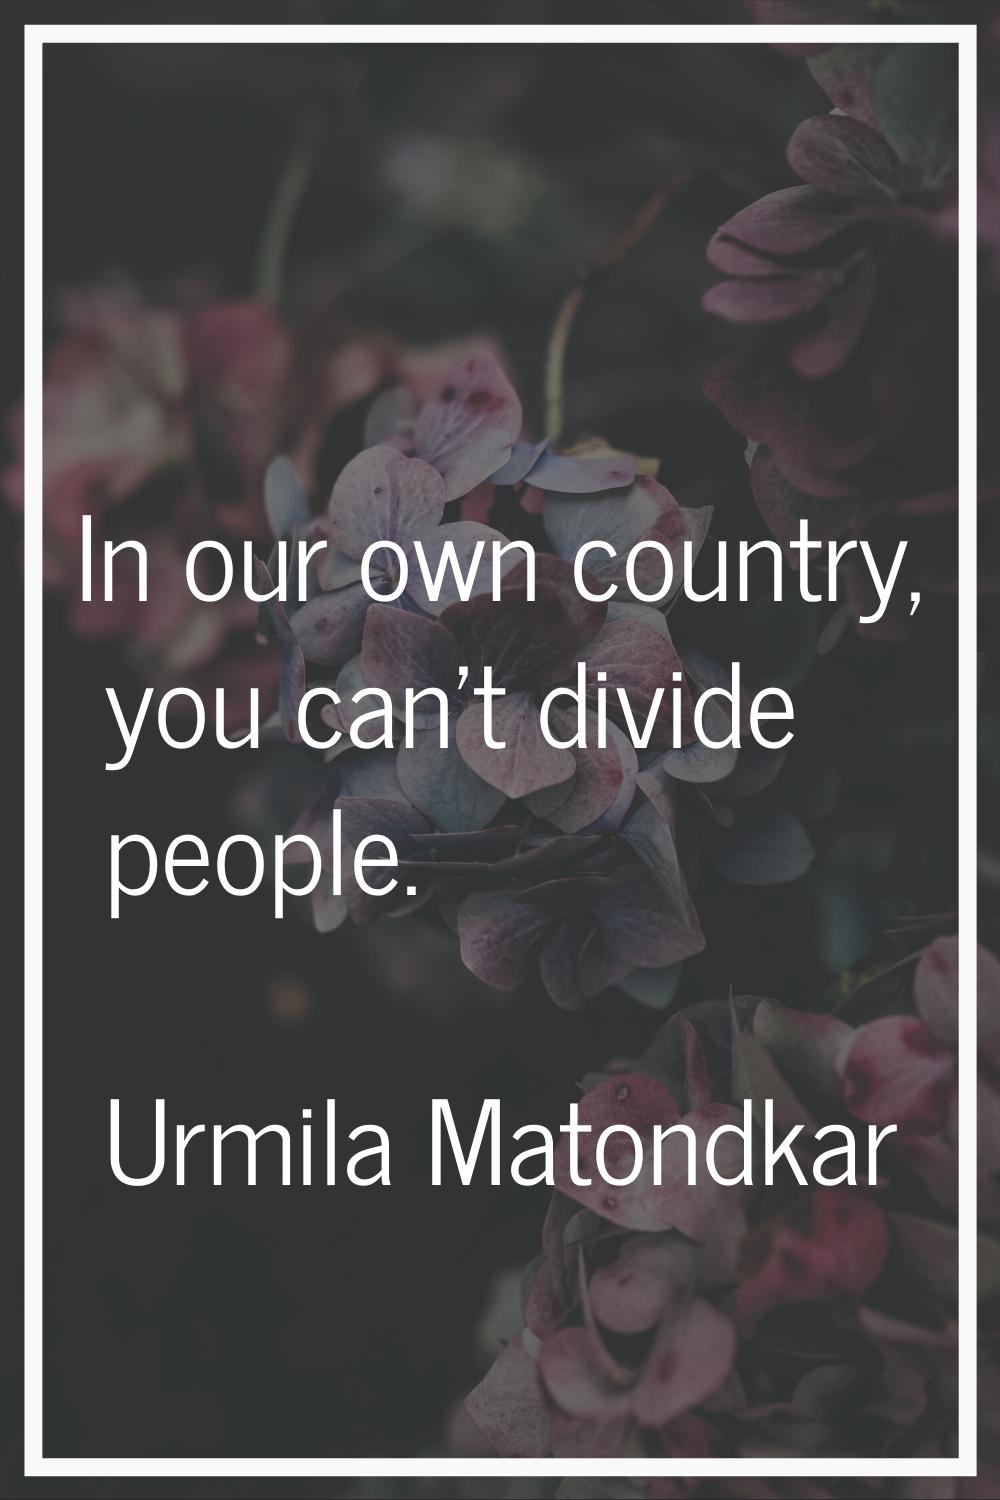 In our own country, you can't divide people.